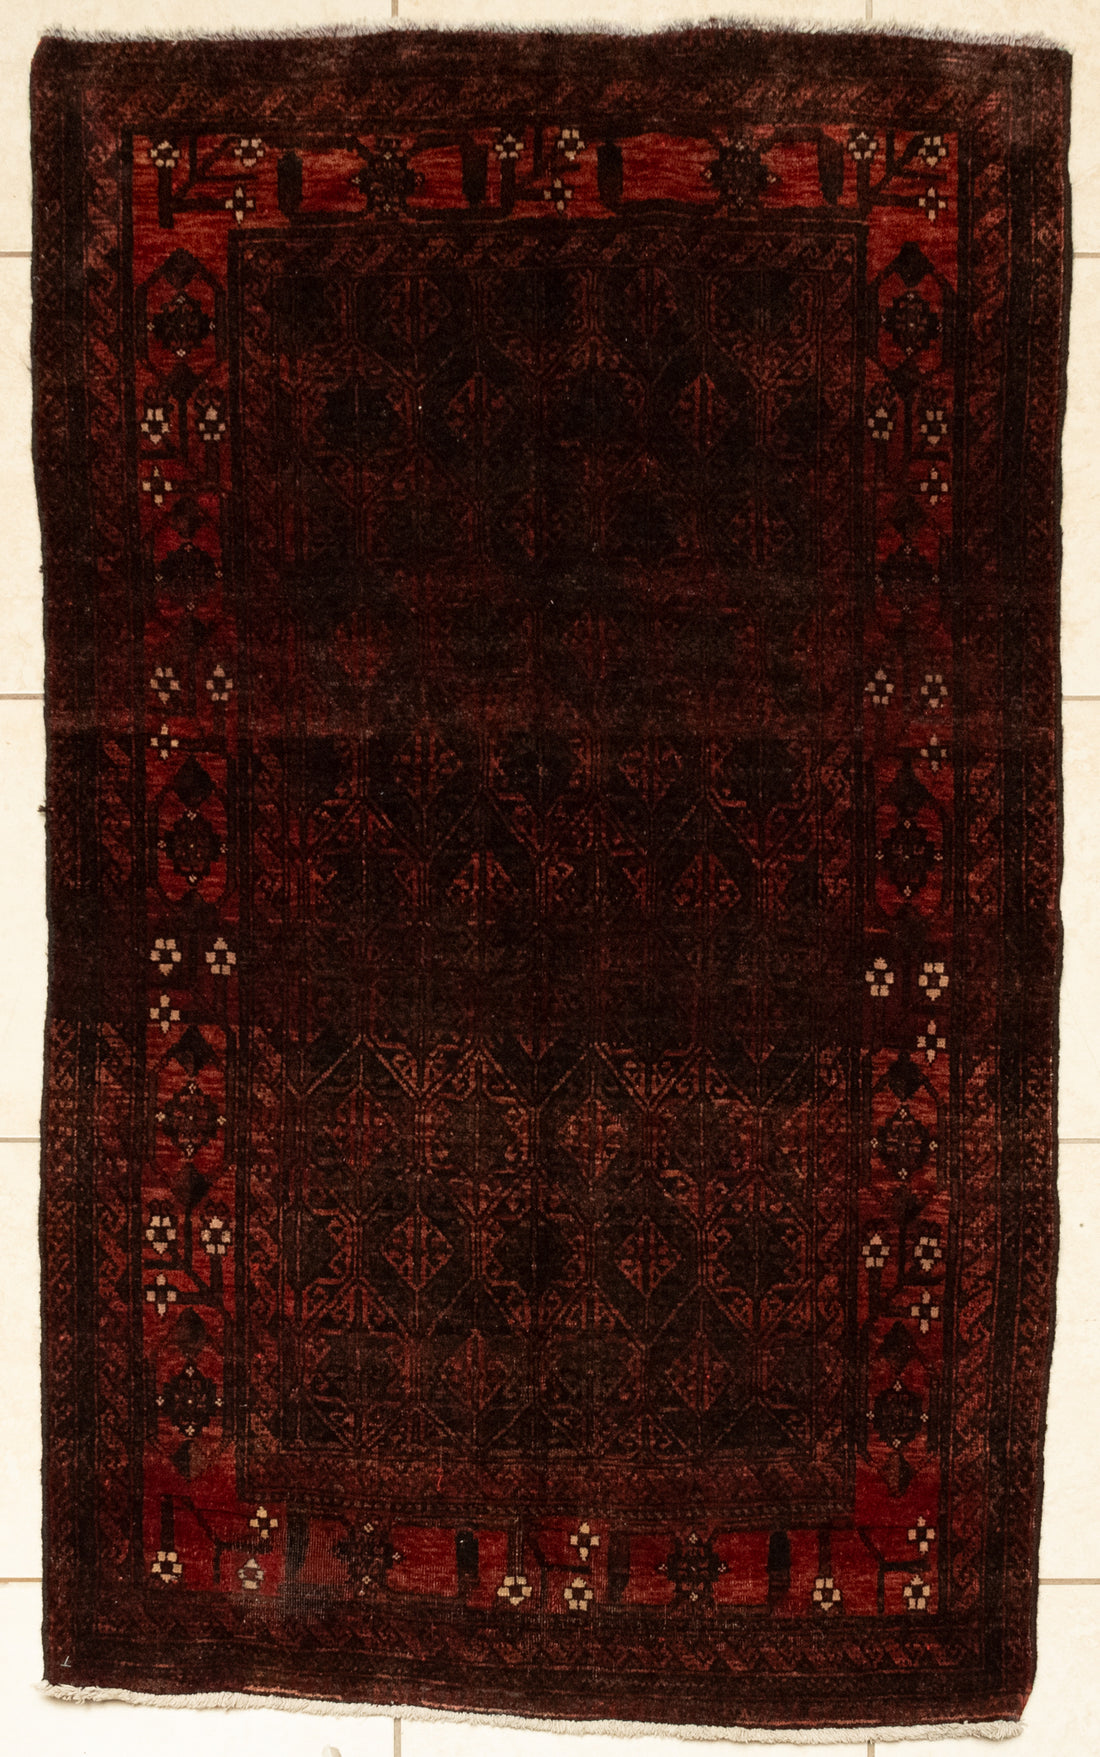 Hand-Knotted Wool Turkmen Rug 5'9" x 3'2"